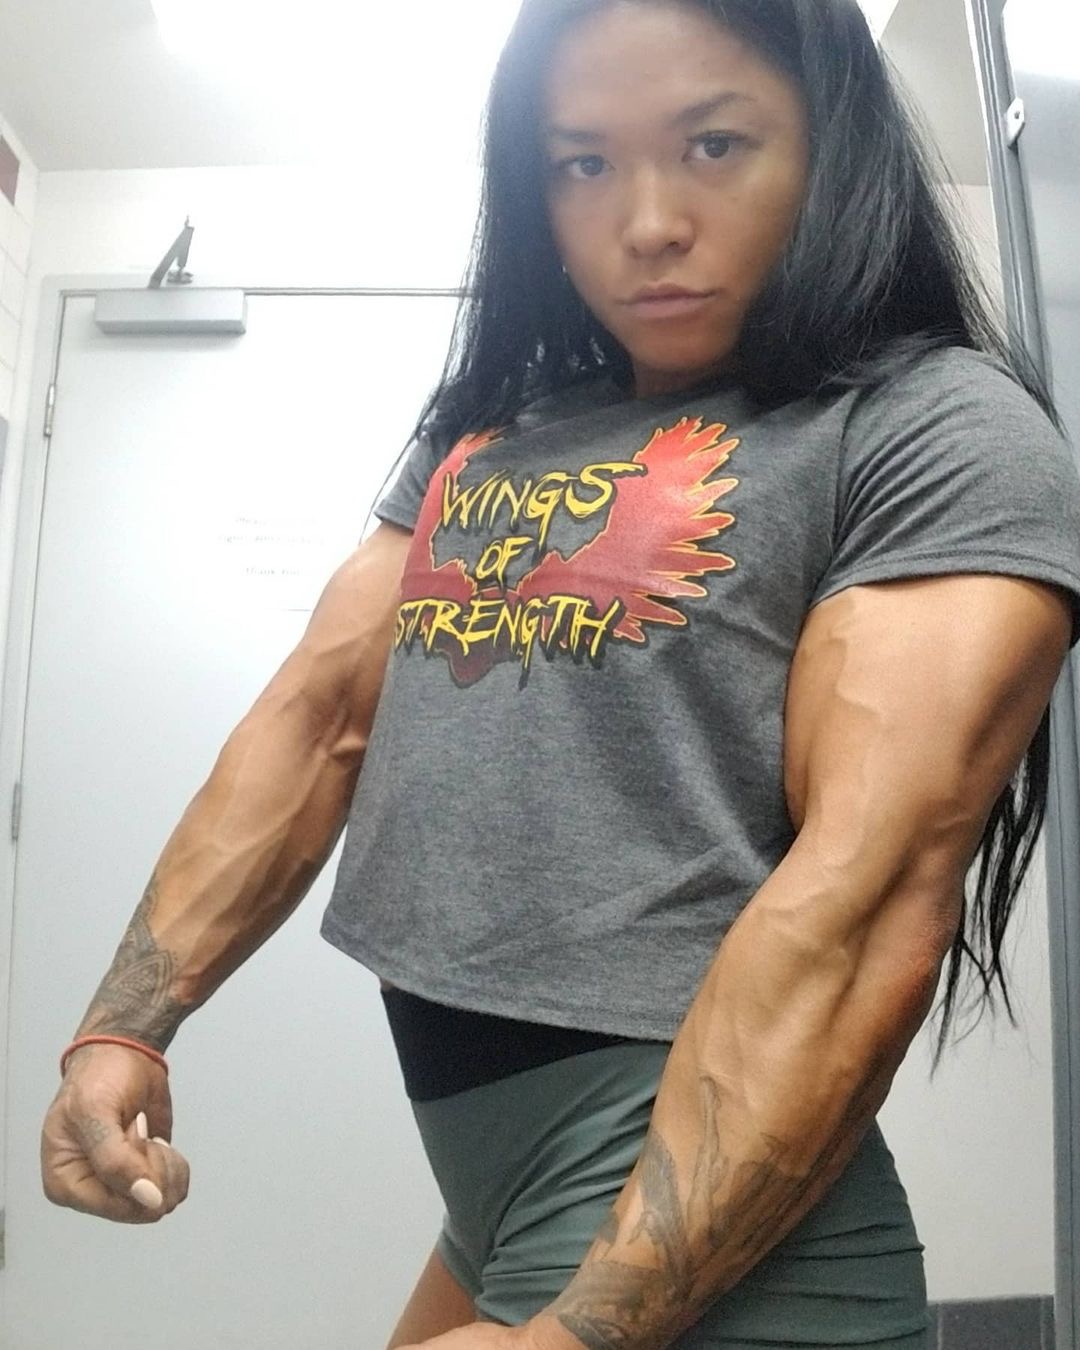 Yee Tong Lift And Carry Delts Female Athletes Bodybuilders Biceps